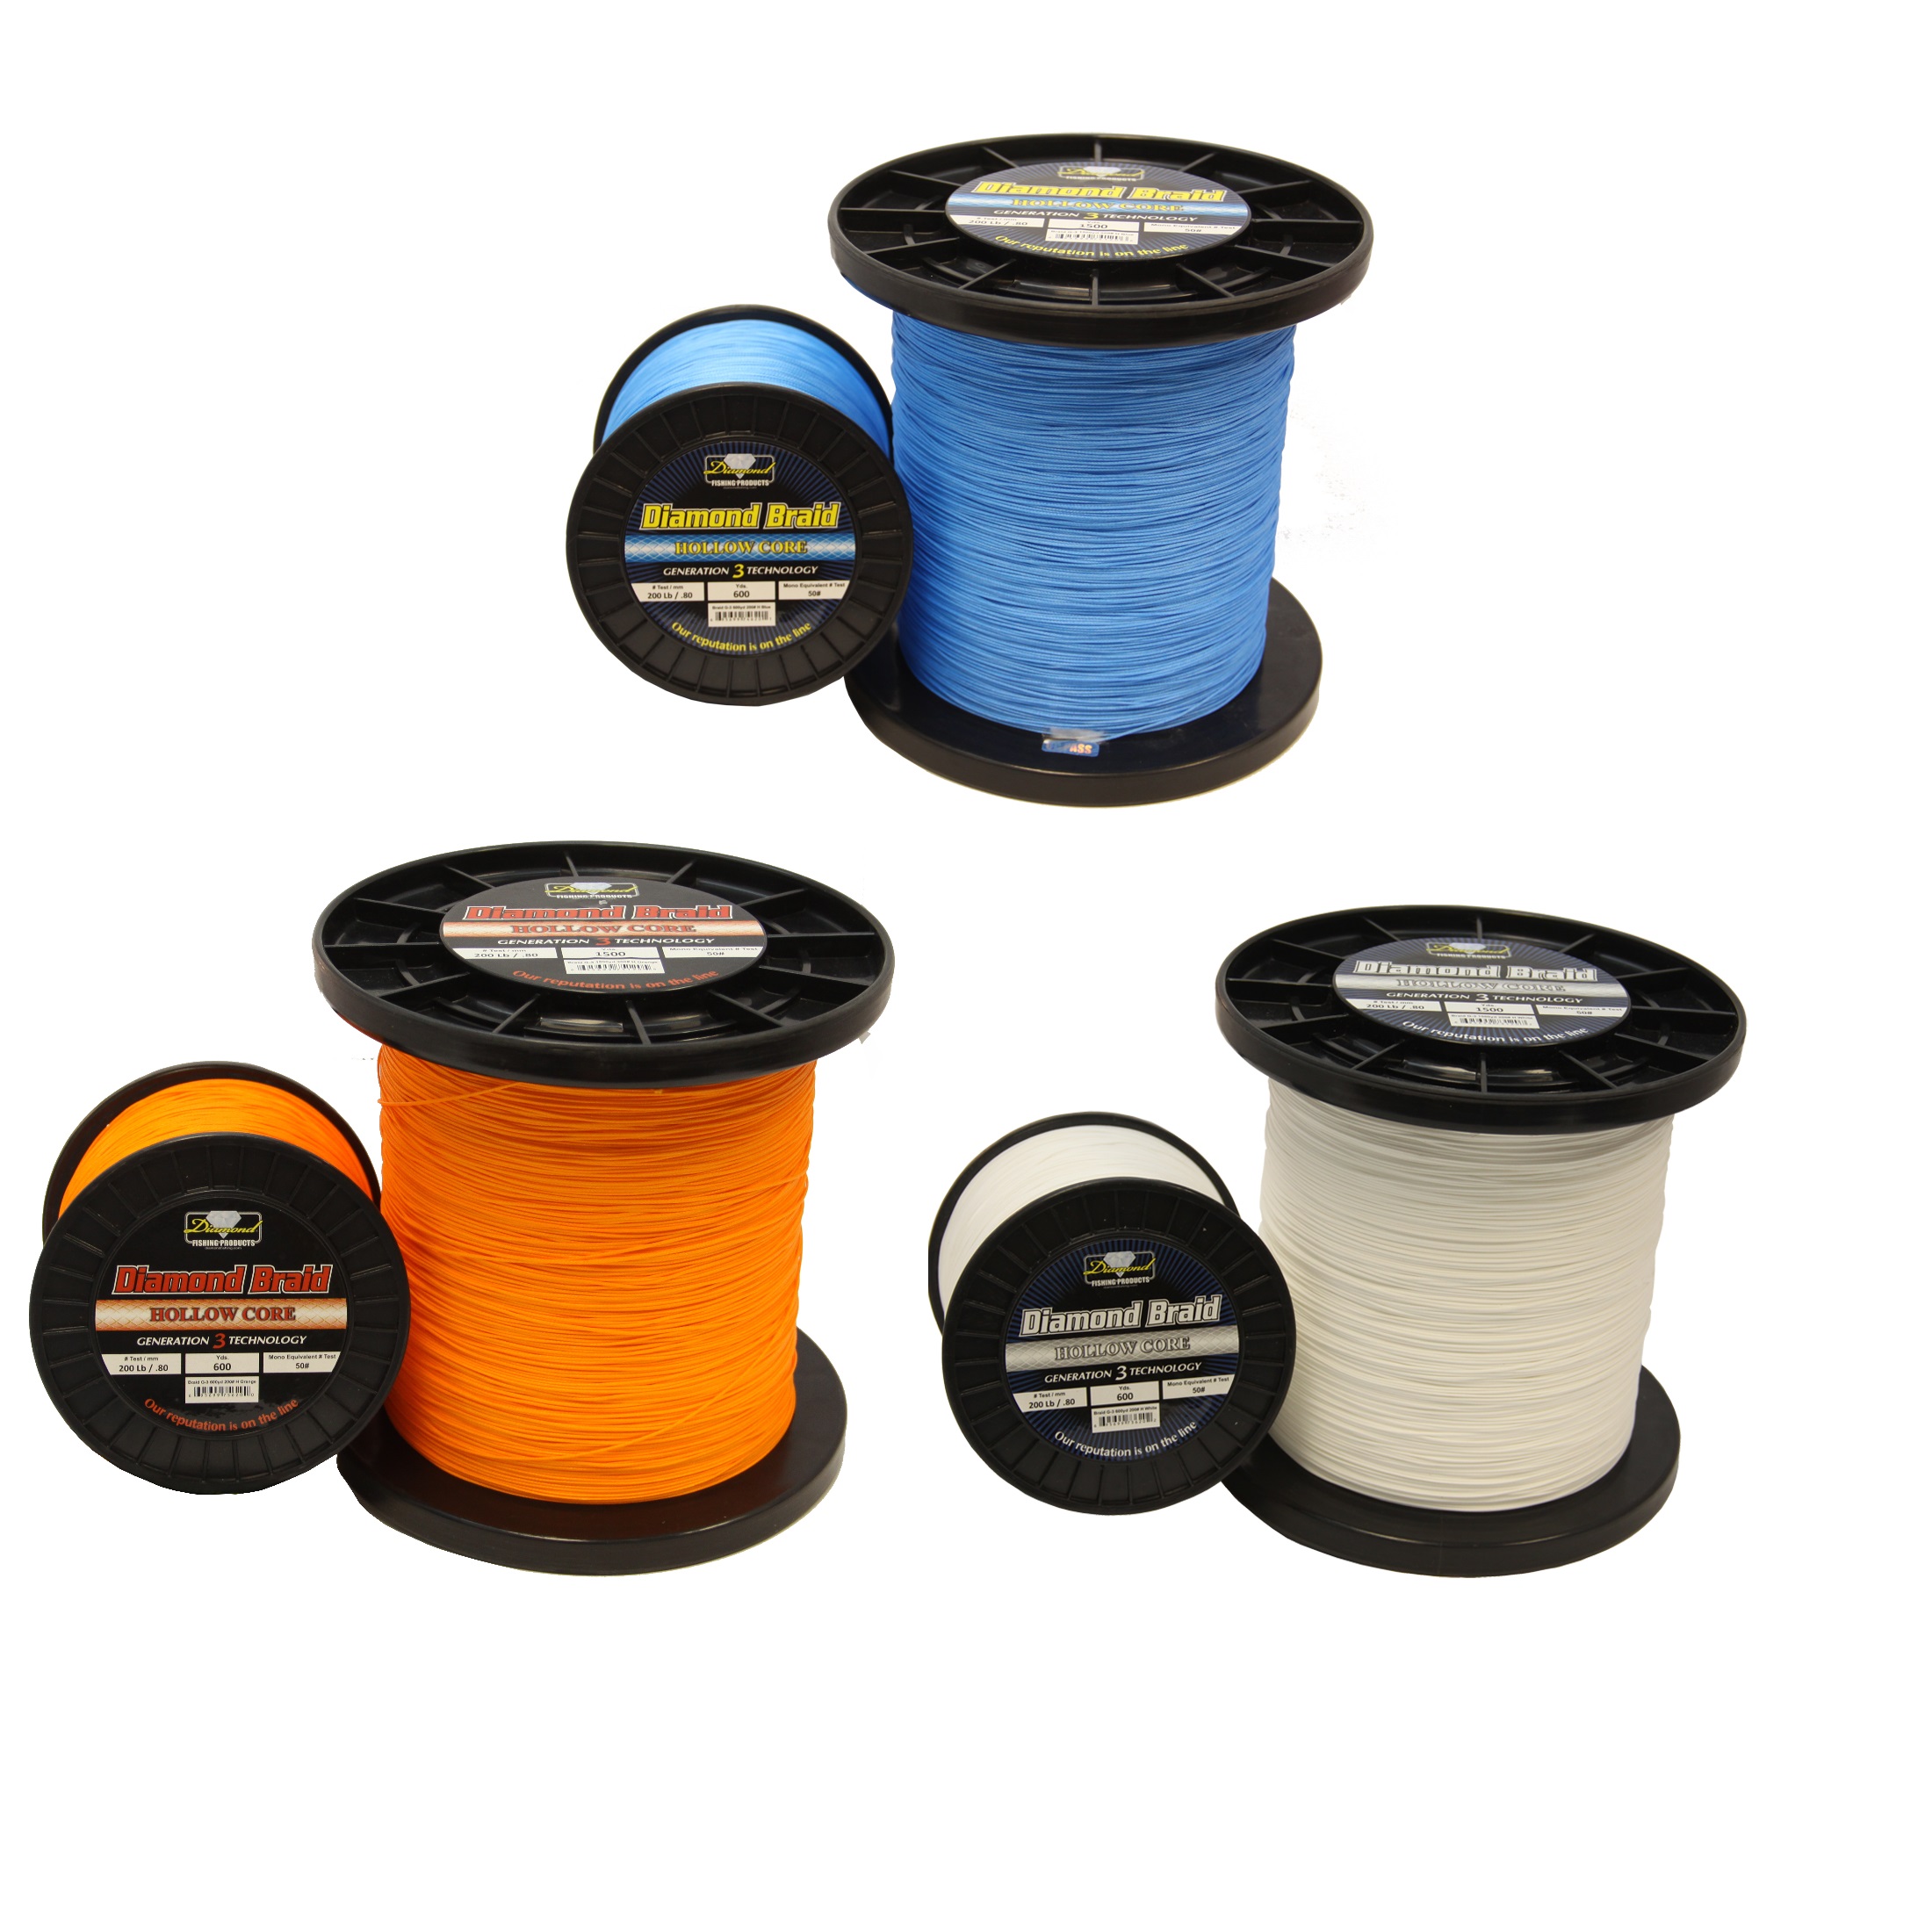 Diamond Braid Generation 3 Hollow Core 3000yd Spools - Fisherman's Outfitter